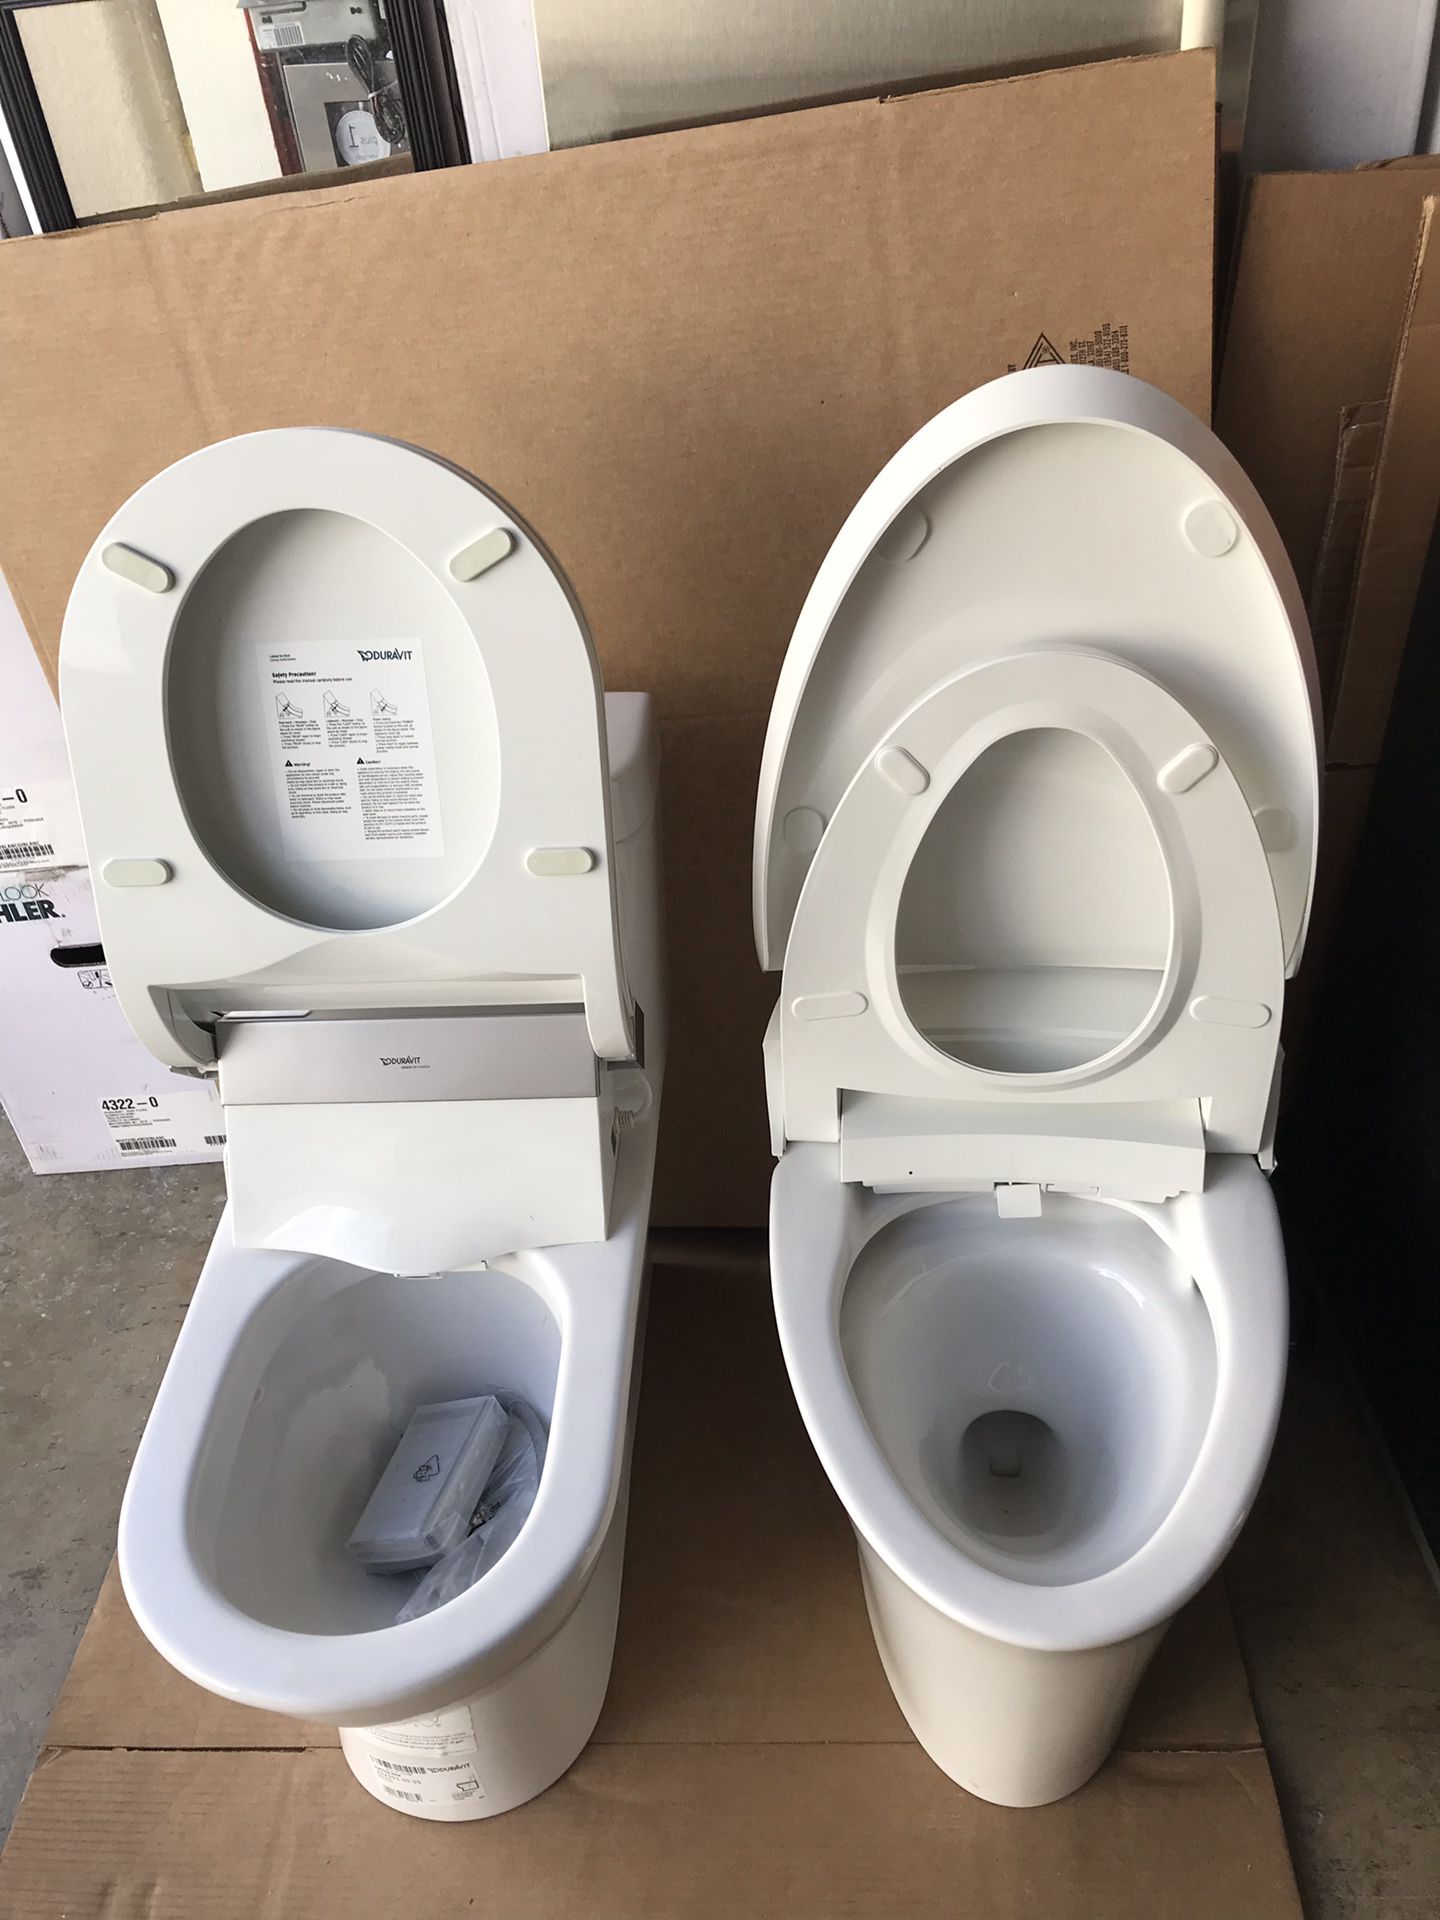 Theses twos toilets are showroom display brand are Kohler & duravit both toilets are electric seat bidet,